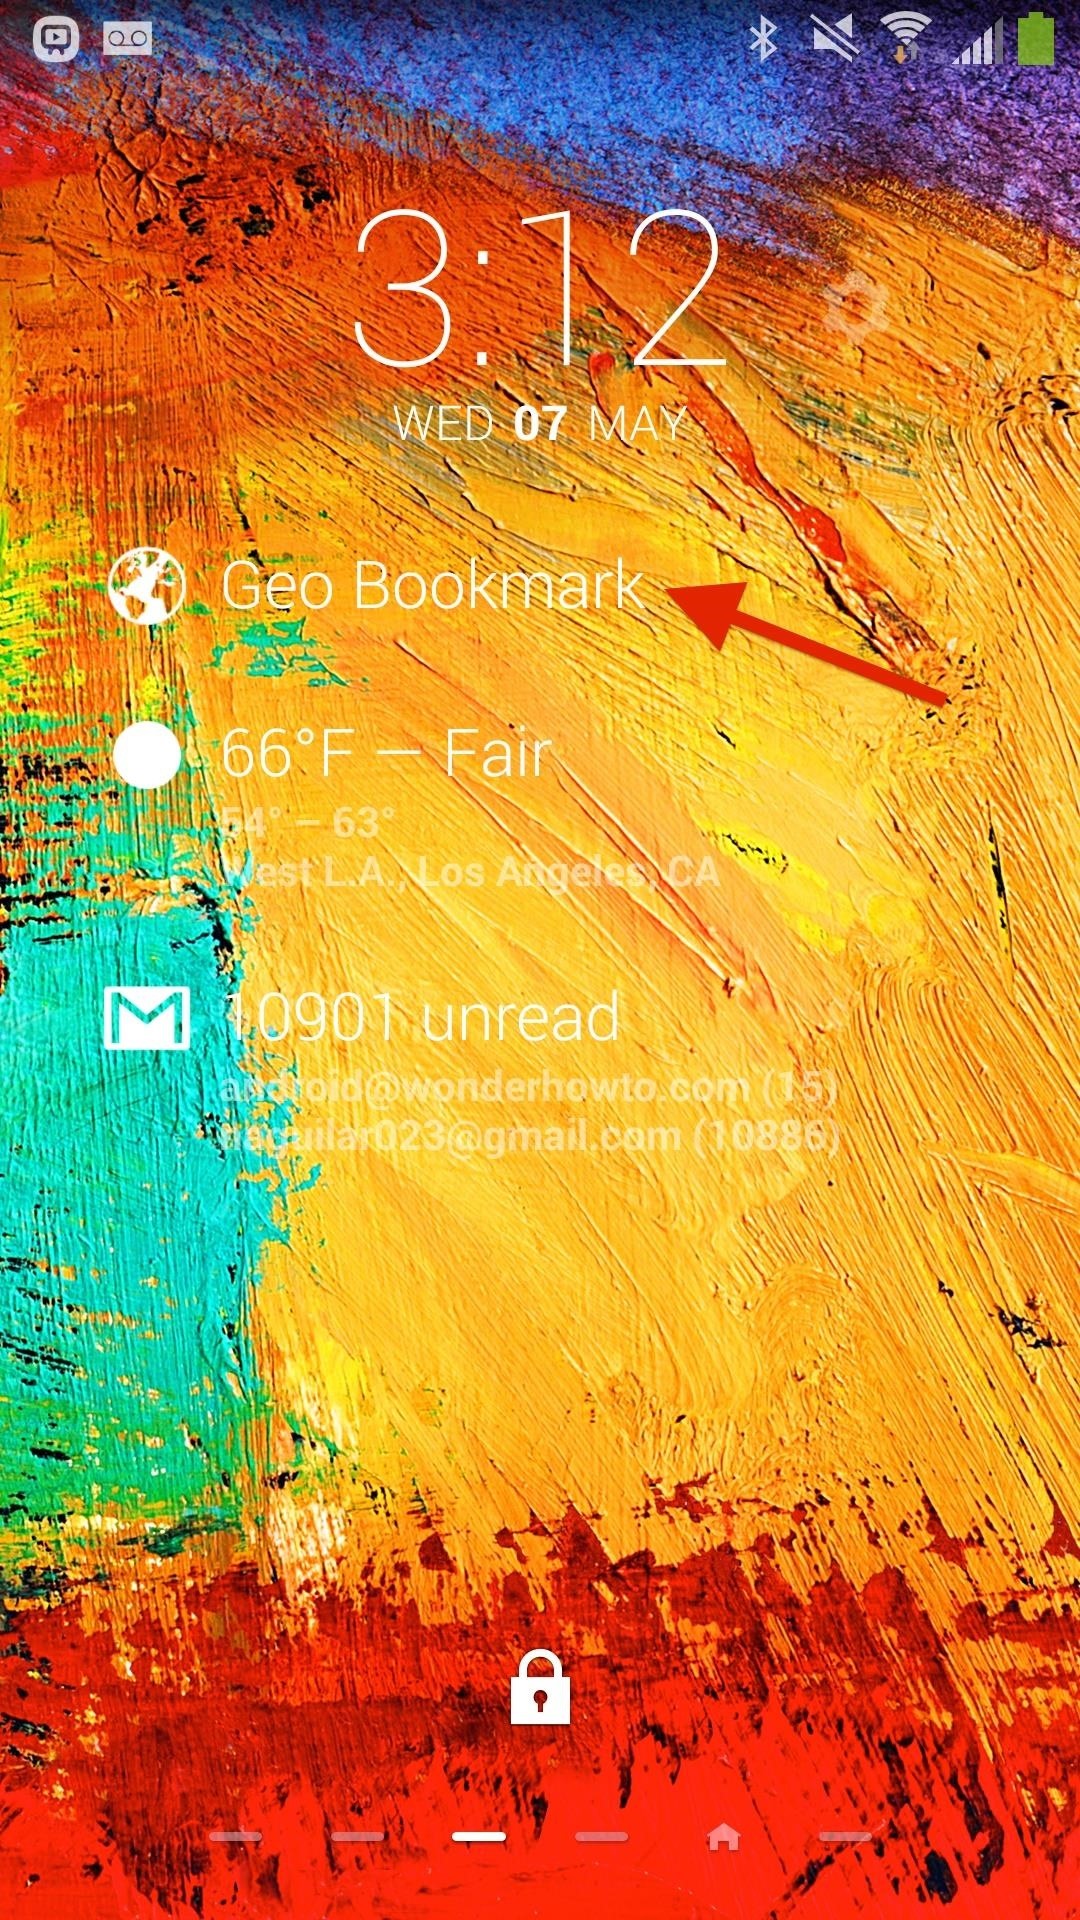 How to Create & Access Location Bookmarks on Your Galaxy Note 3 with a Single Tap